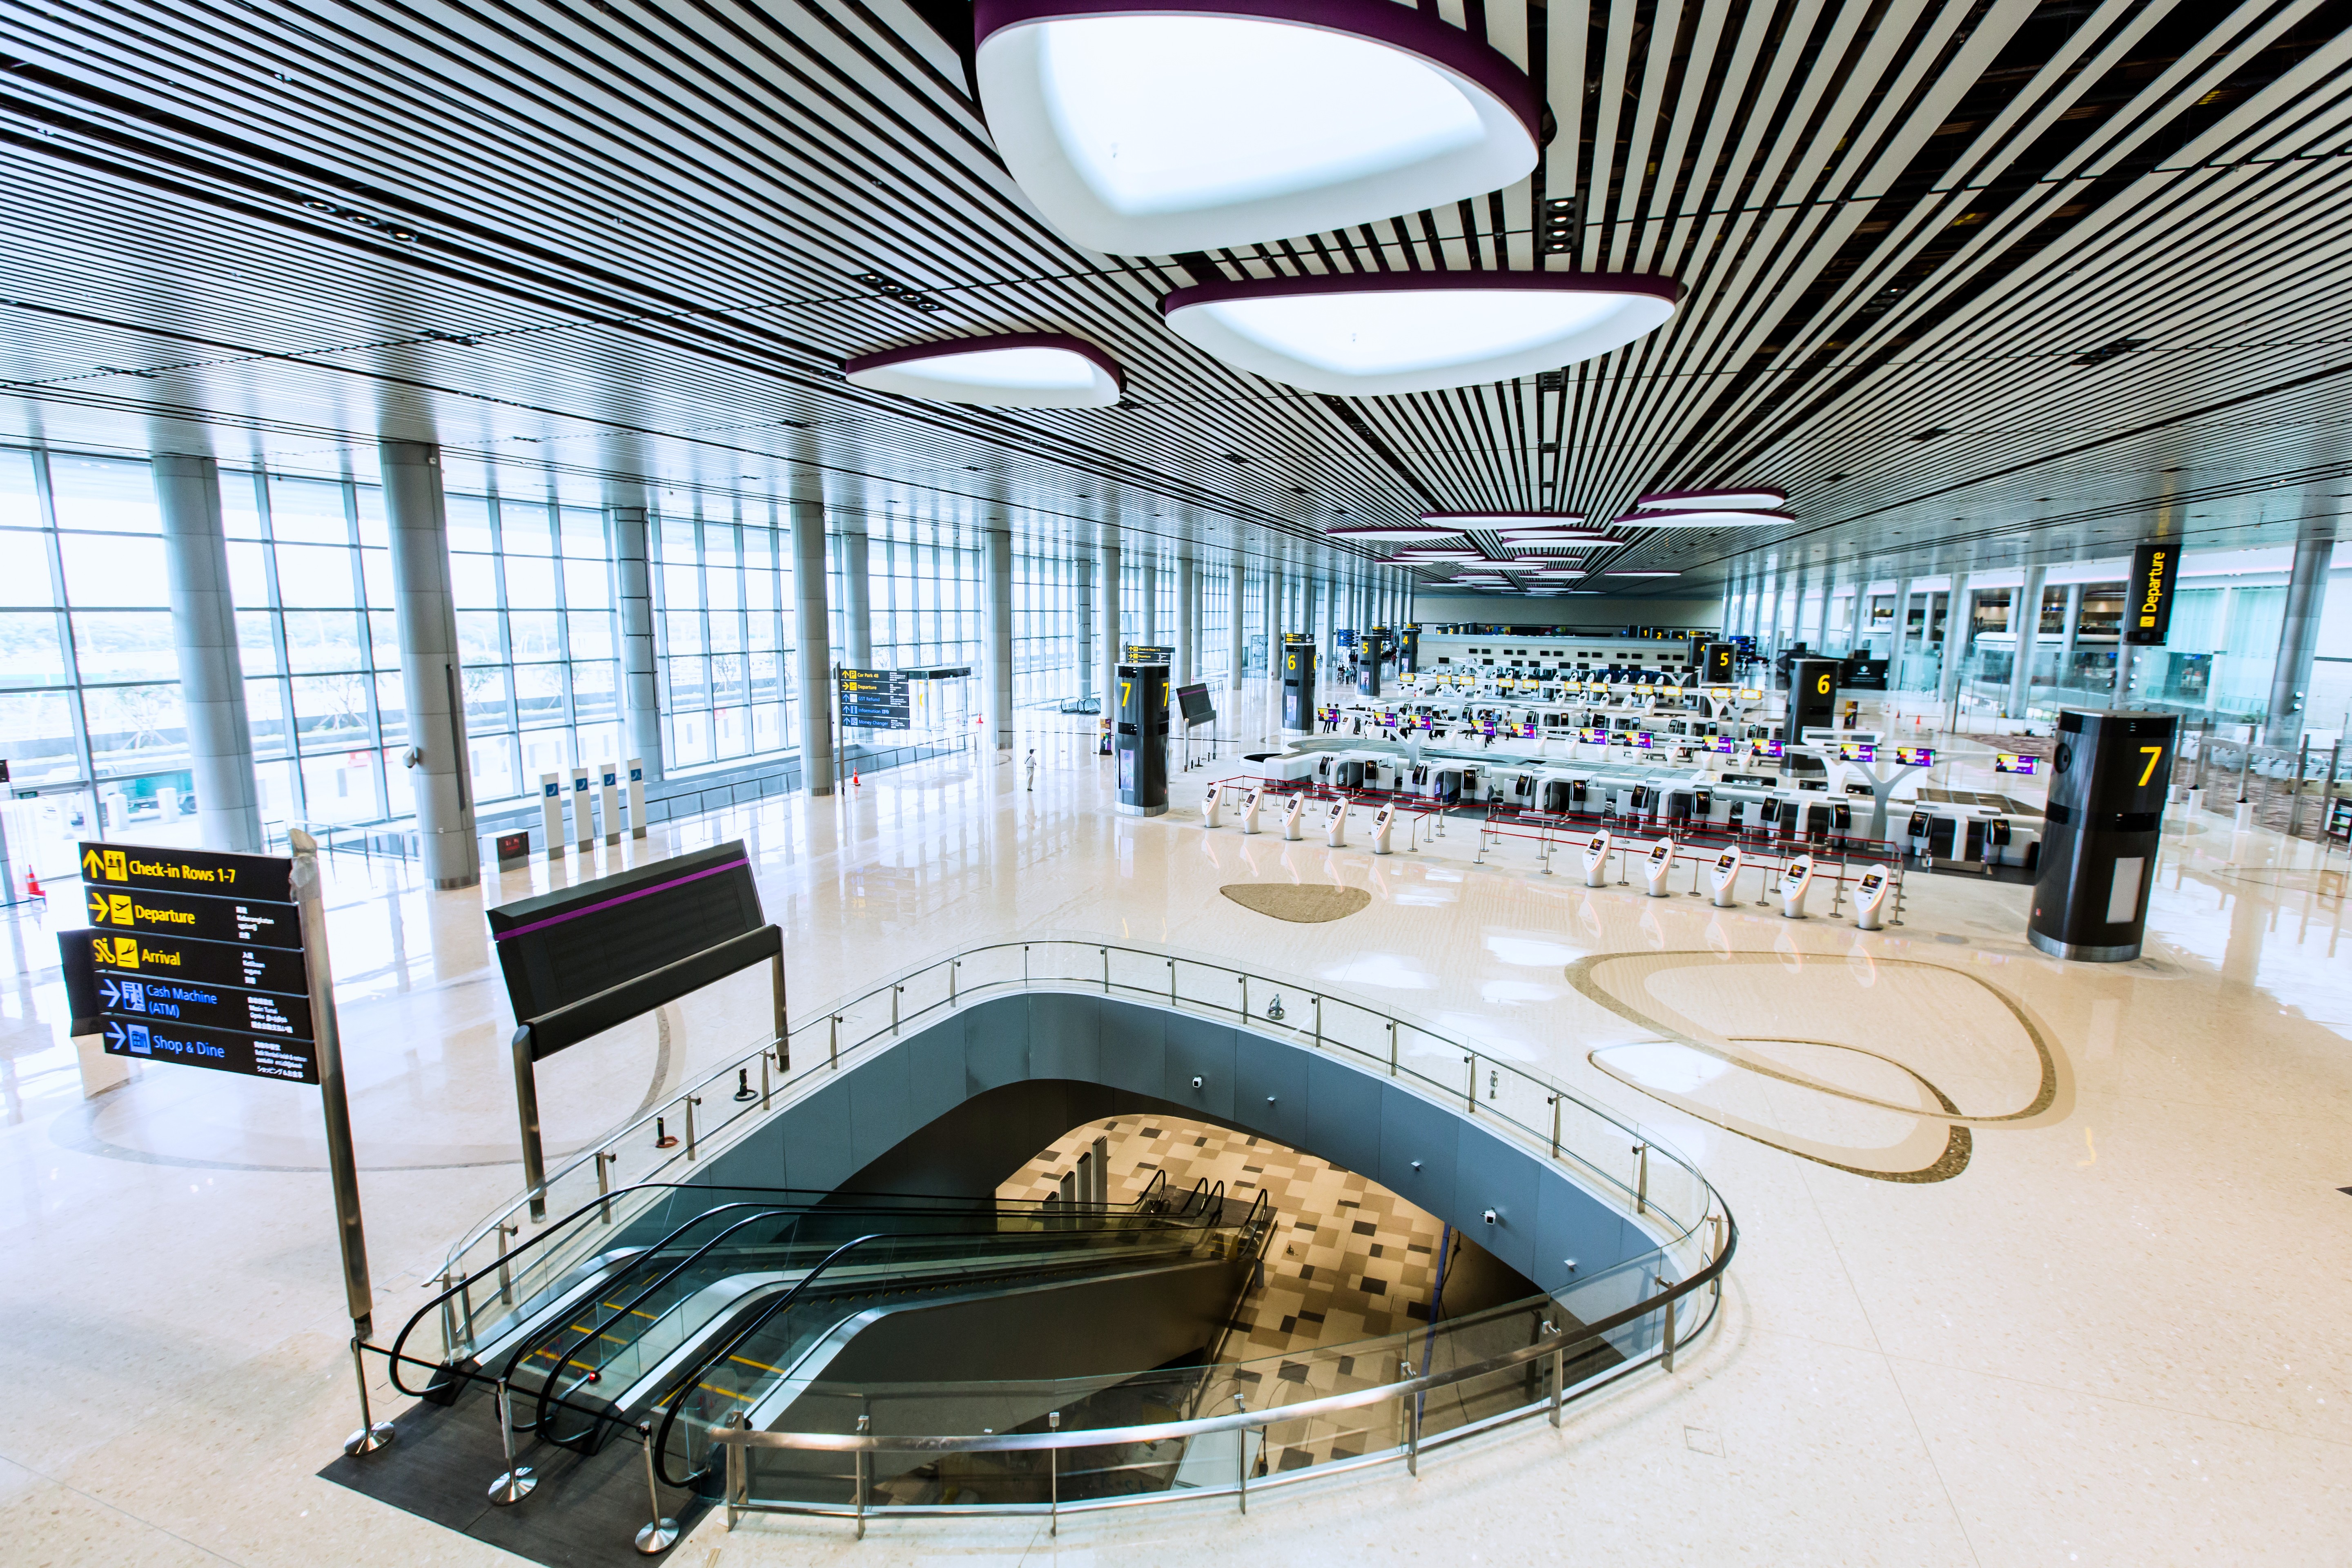 What You May Not Know About Changi Airport - 8days